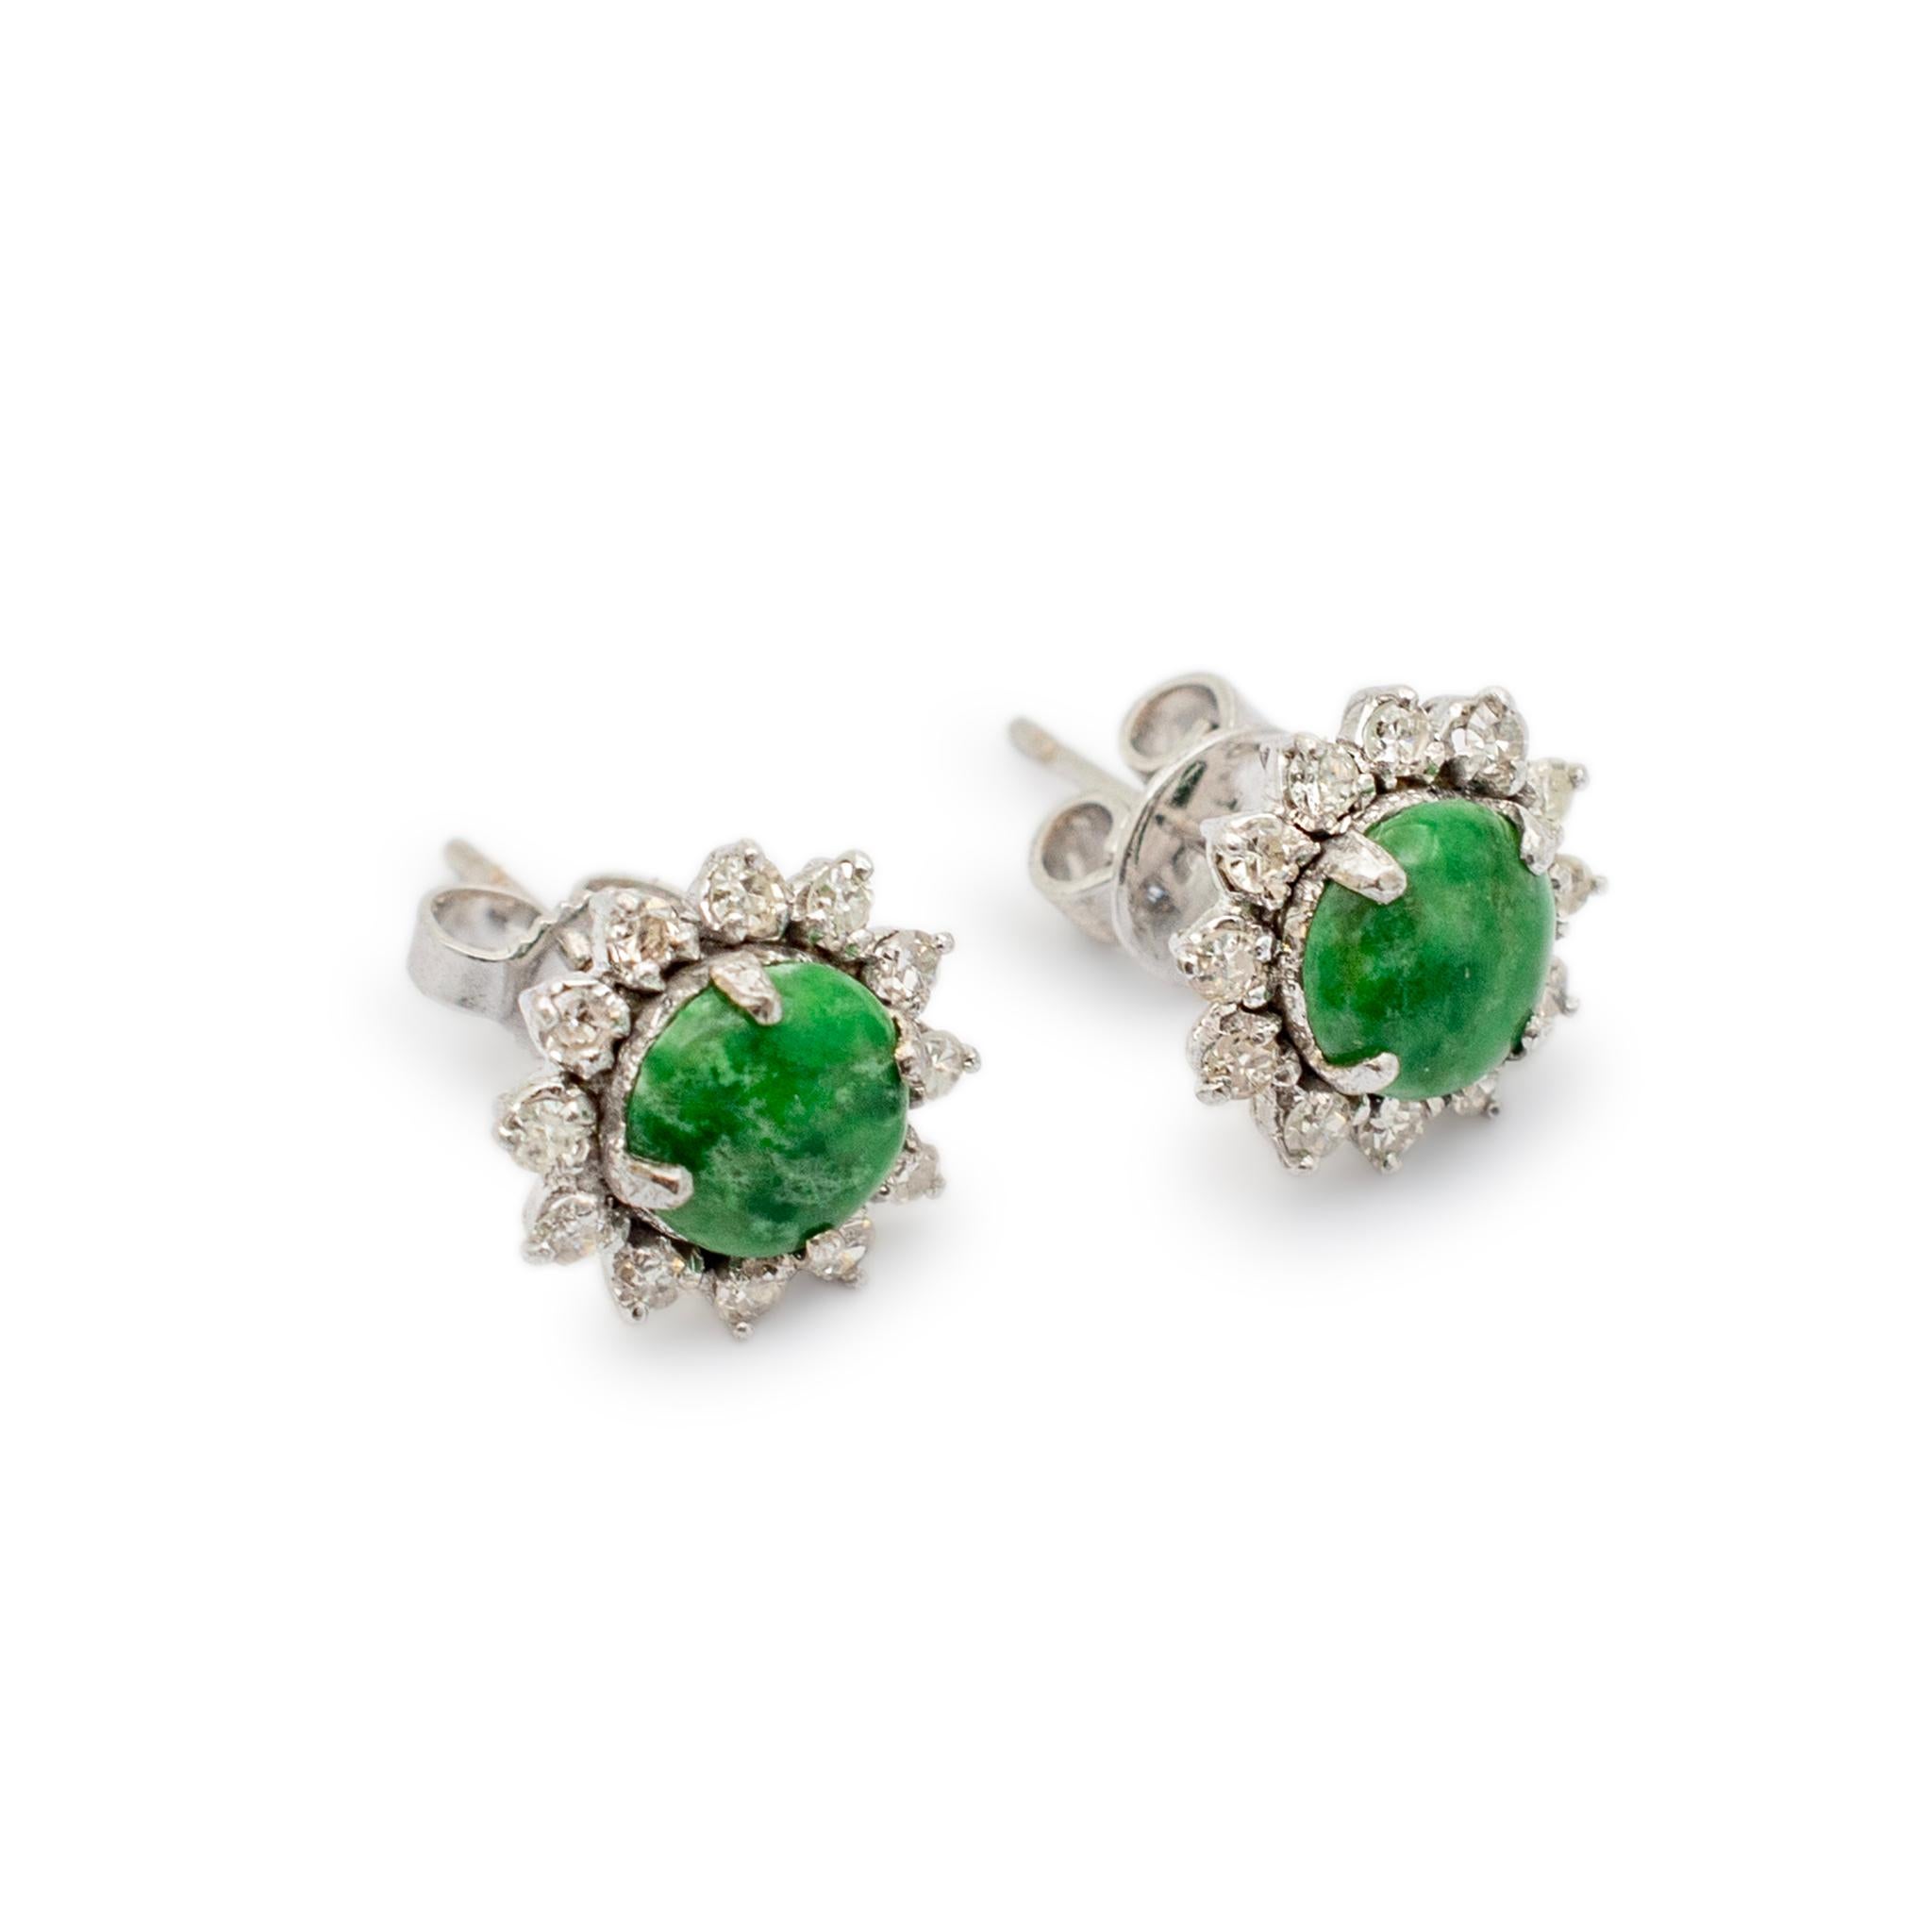 Gender: Ladies

Metal Type: 14K White Gold

Length: 0.25 inches

Diameter: 10.70 mm

Weight: 2.27 grams

One pair of ladies 14K white gold, diamond and jadeite vintage stud earrings with push backs. Engraved with 